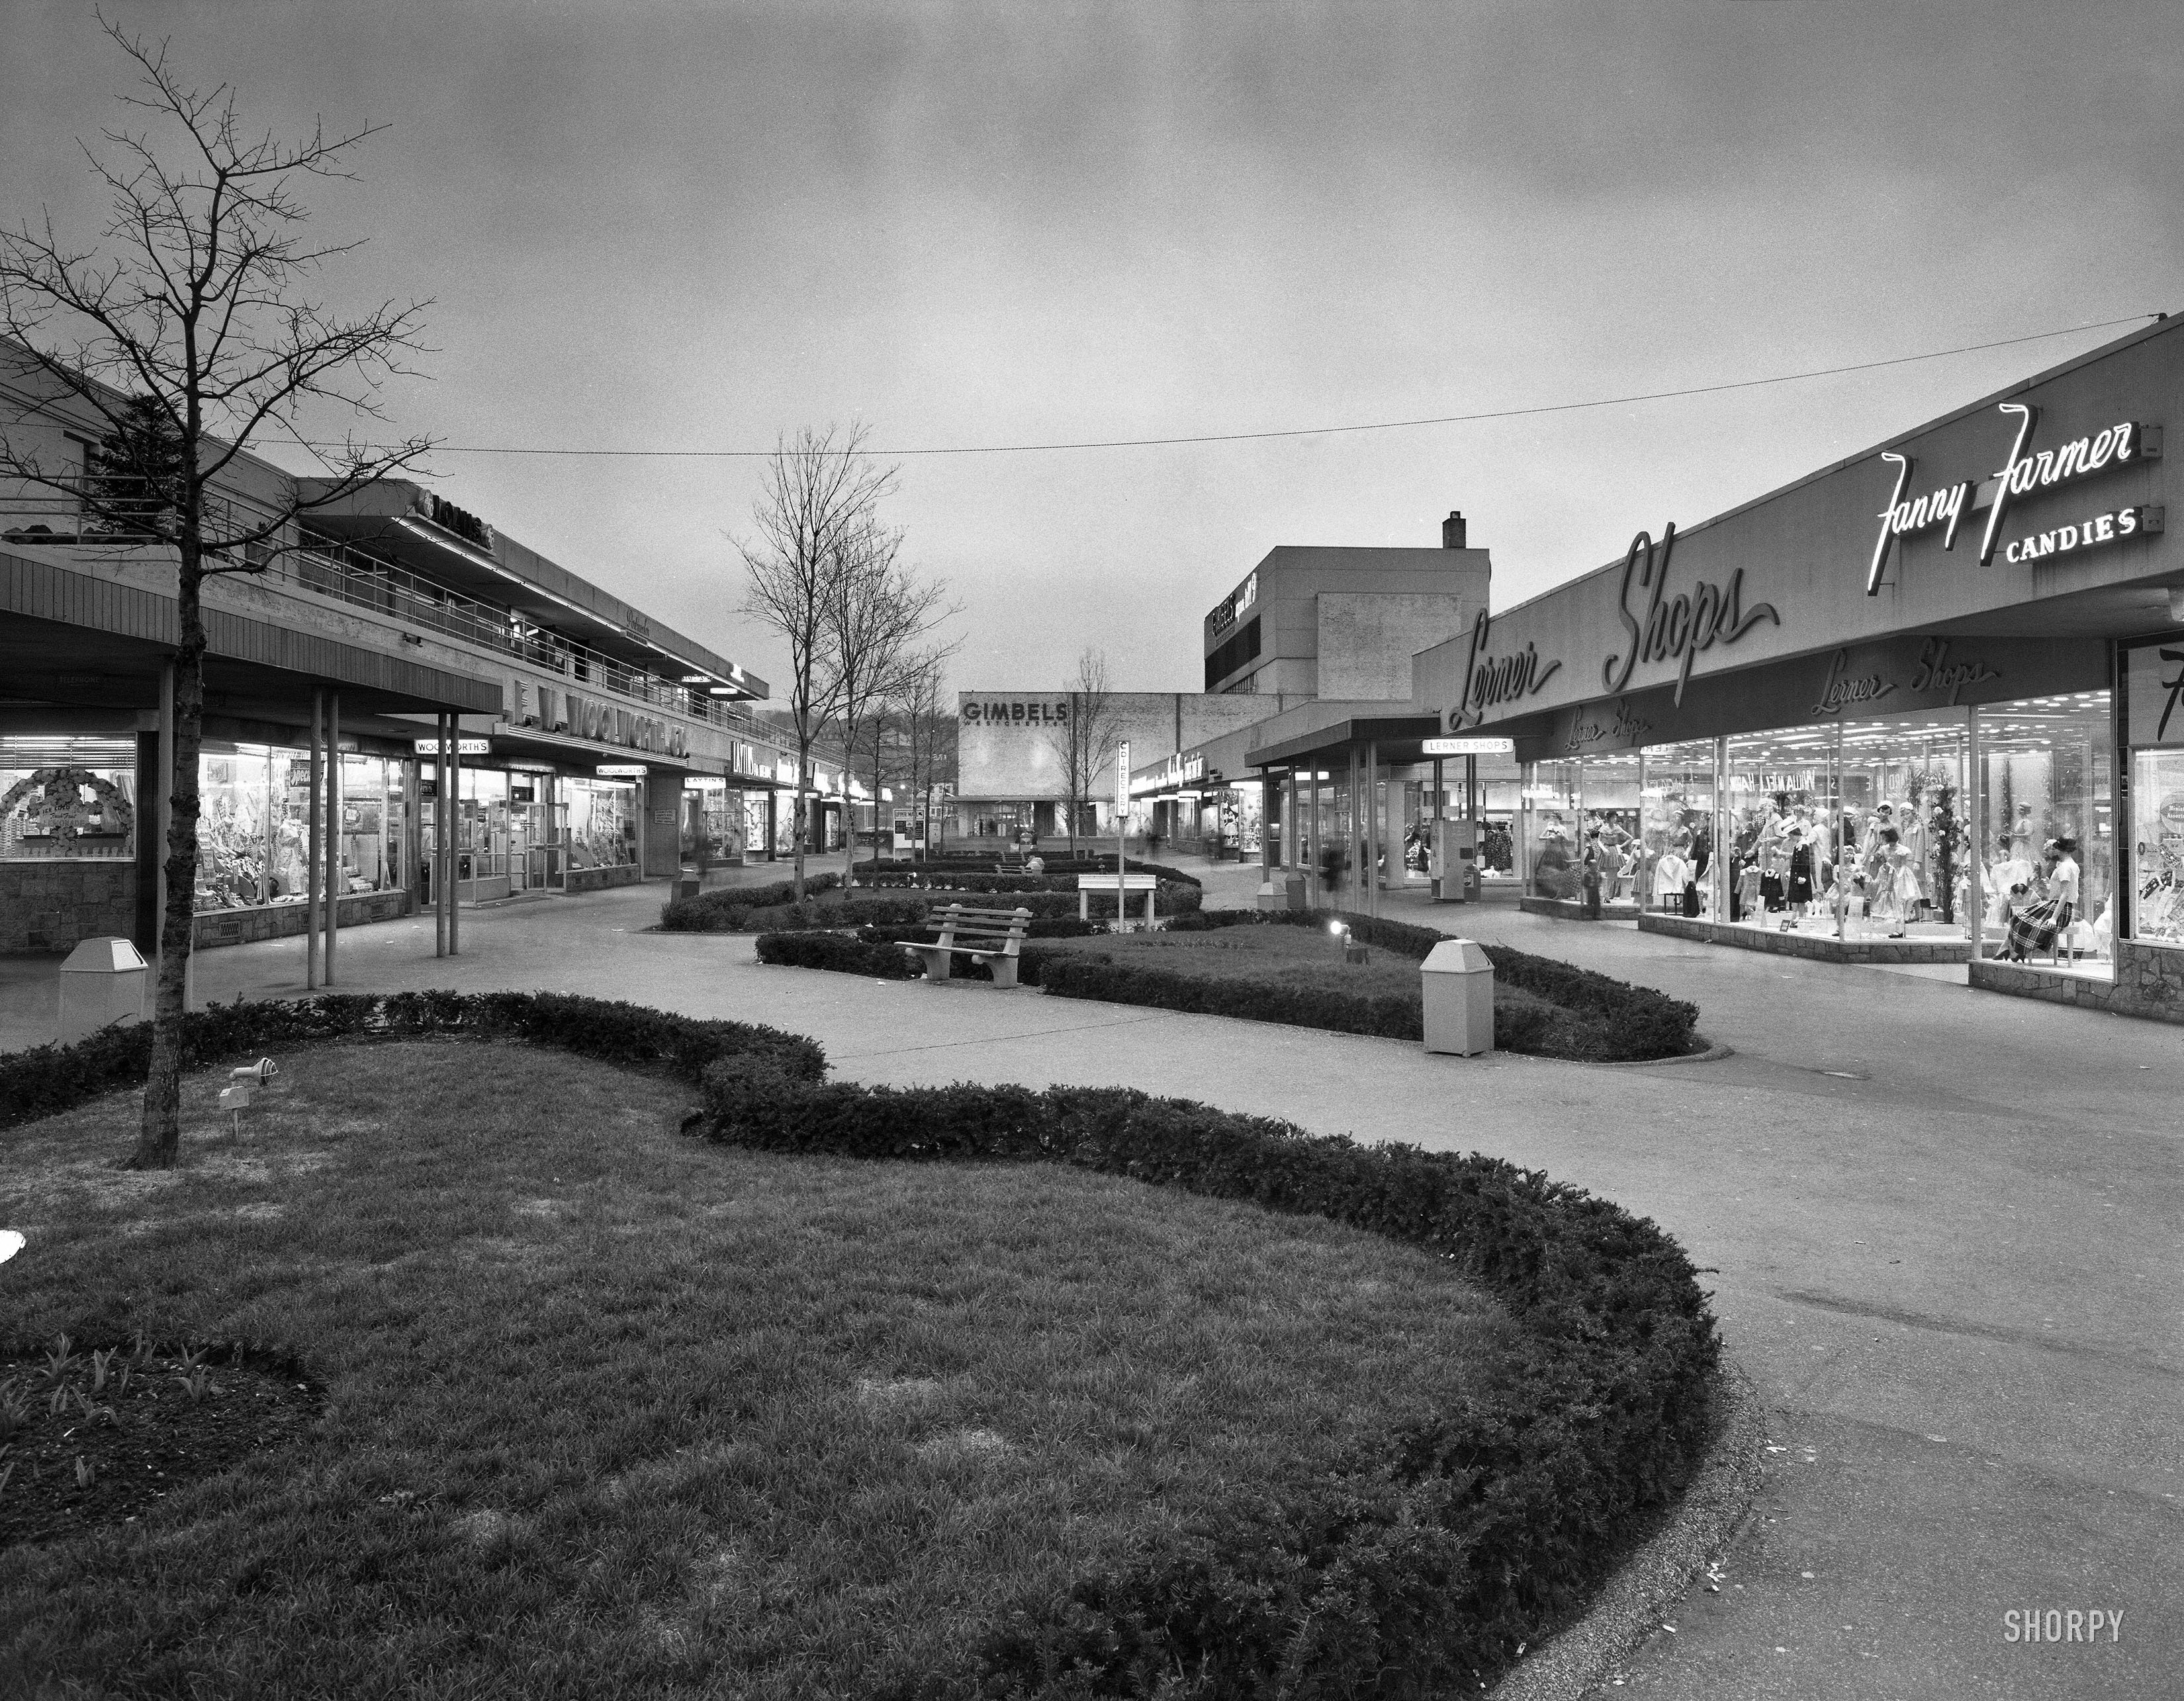 April 13, 1959. "Cross County Center. Yonkers, Westchester County, New York. Dusk. Lathrop Douglass, client." Fanny Farmer, Woolworth's, Lerner Shops -- it's hard to know where to begin! Gottscho-Schleisner photo. View full size.